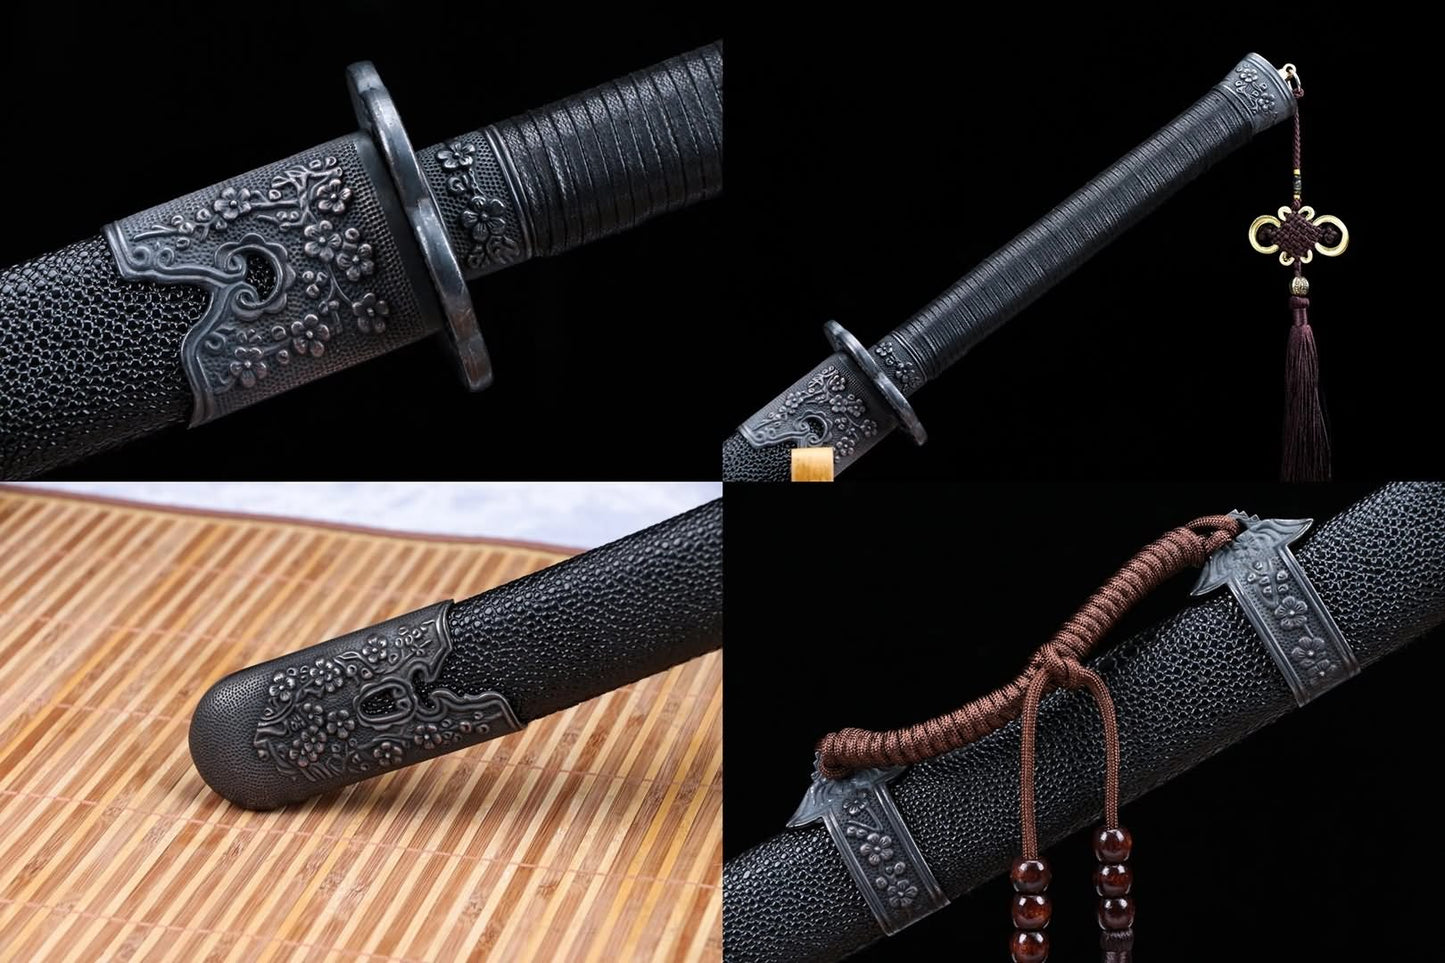 Broadsword,Forged high carbon steel blade,Skin scabbard,Alloy fittings